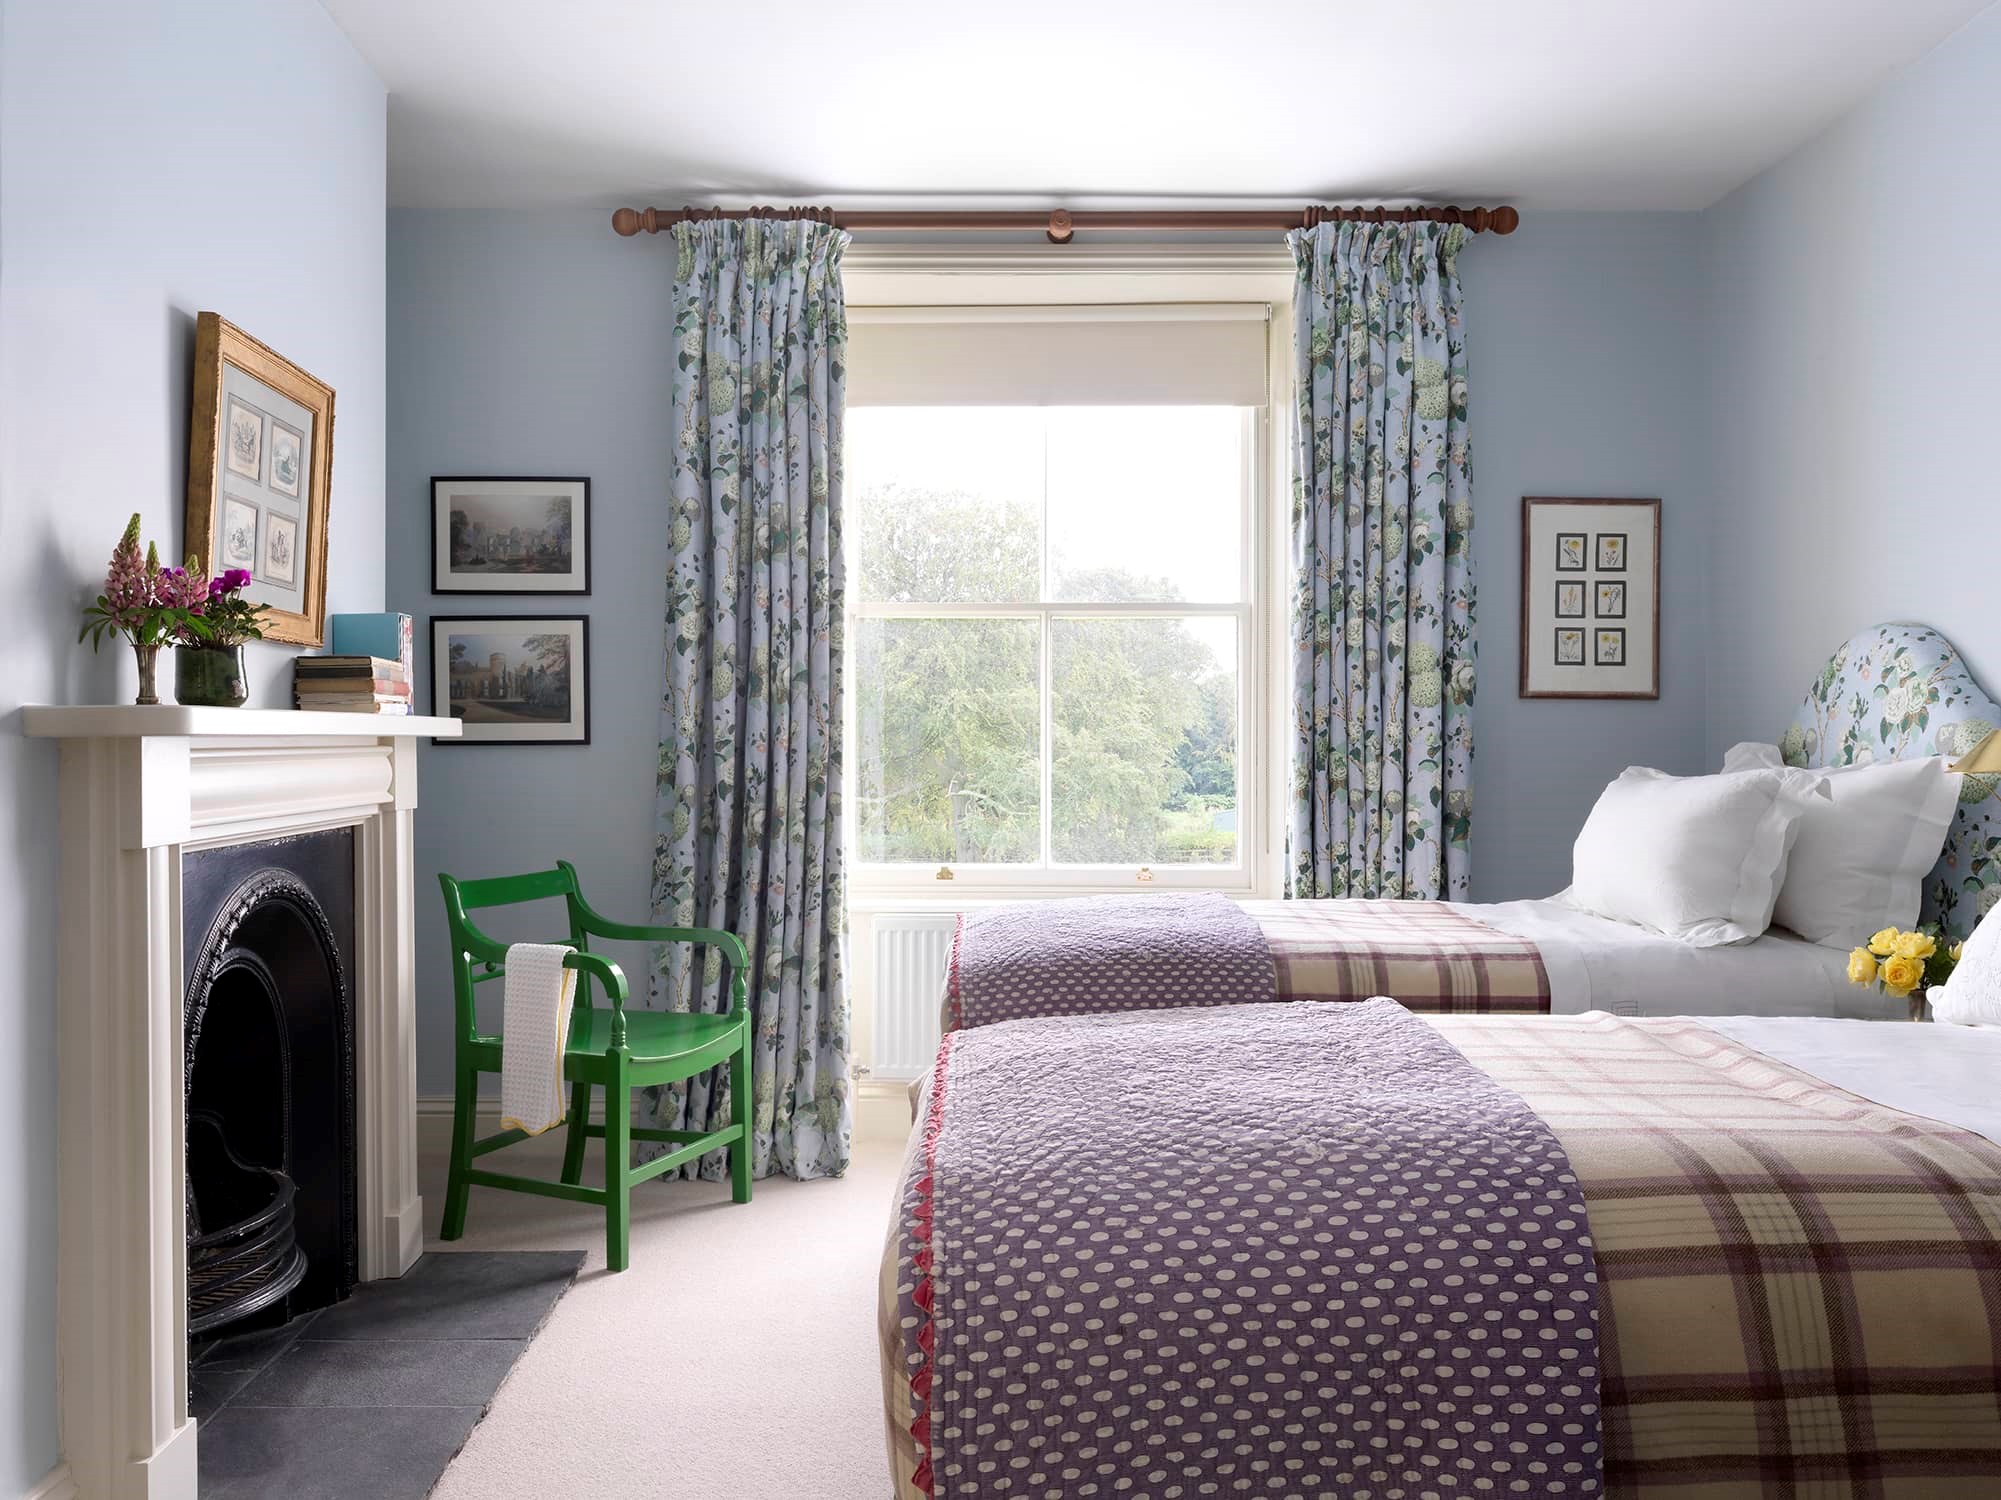 North Farm, Walworth - Spring bedroom with twin bed which can be a superking double on request